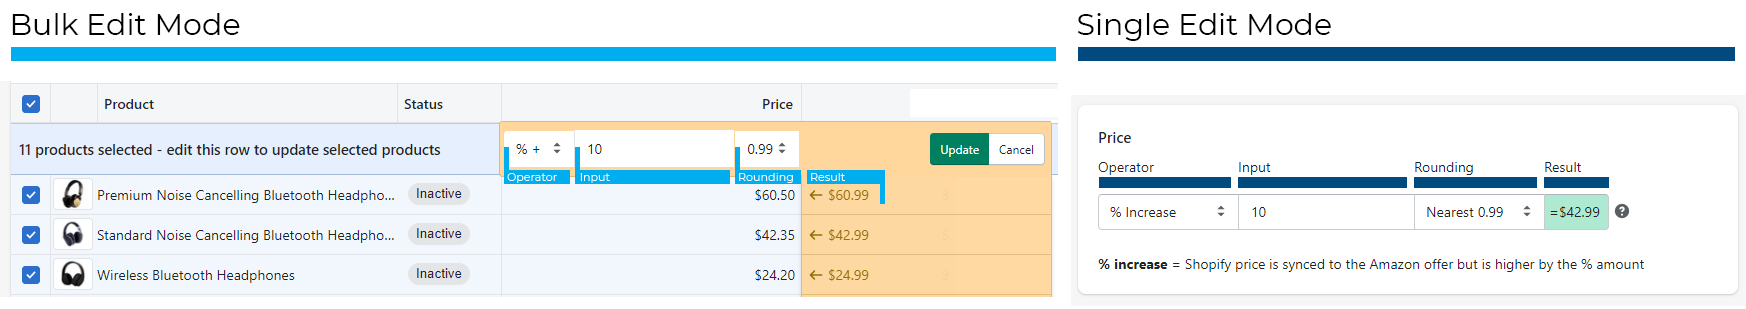 pricing3.png